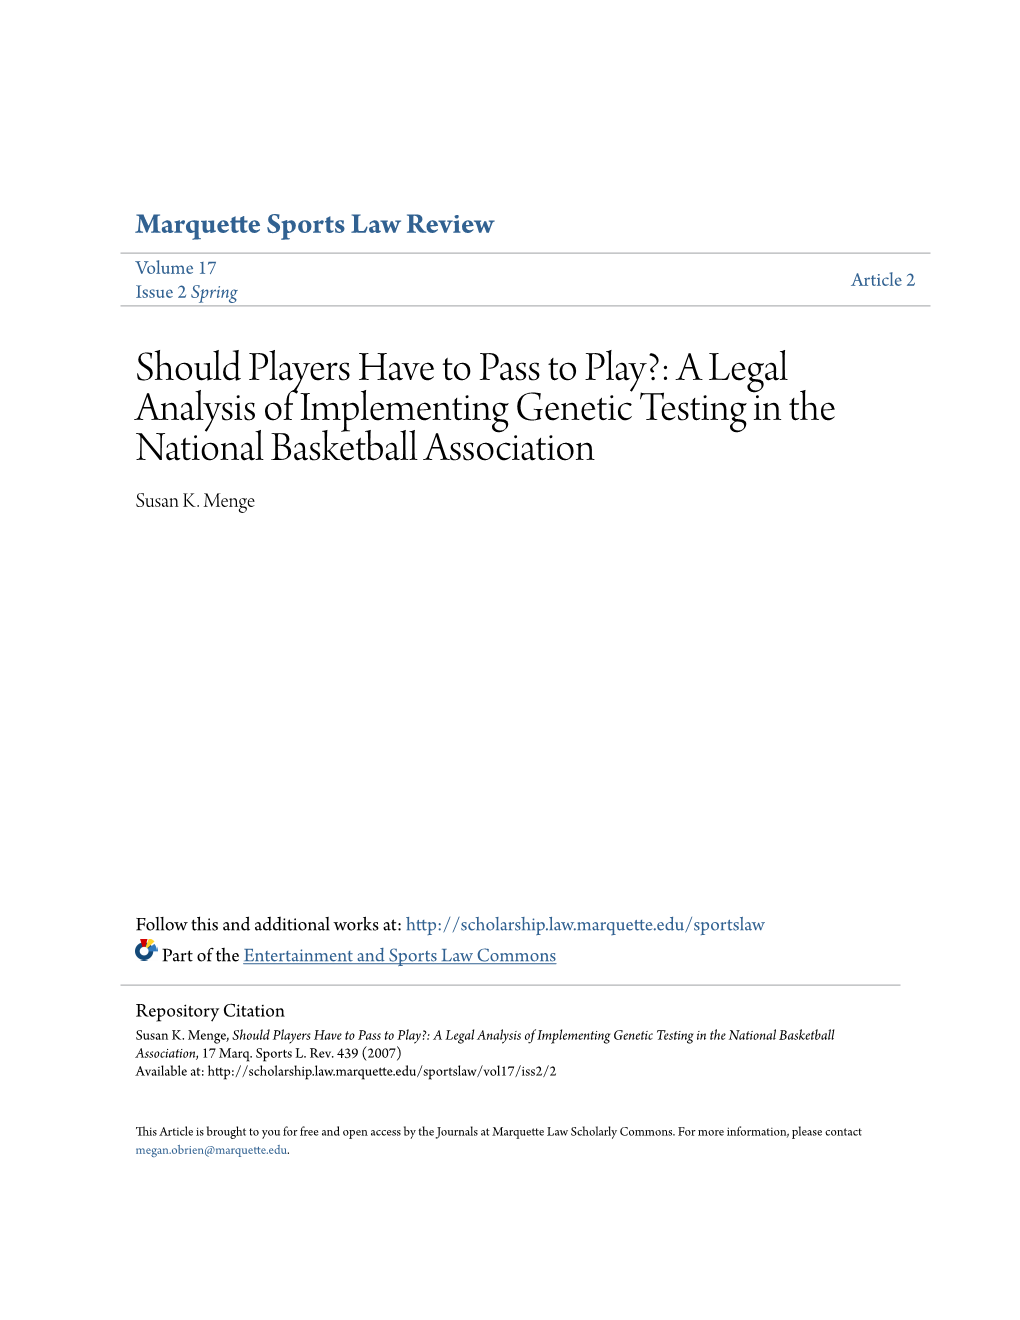 A Legal Analysis of Implementing Genetic Testing in the National Basketball Association Susan K